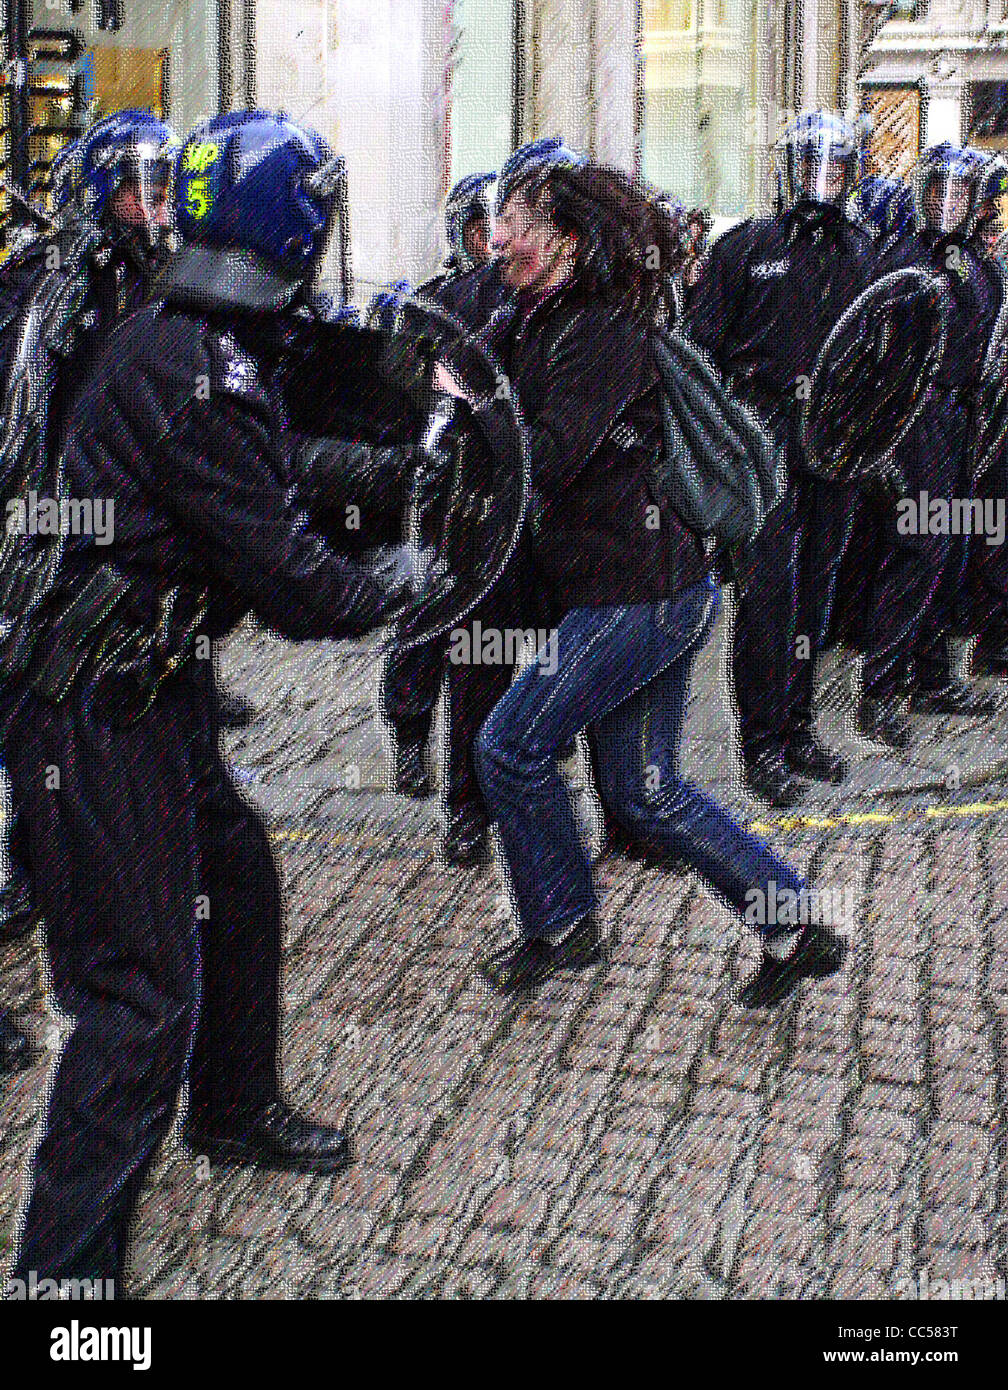 Generic illustrations of British Riot Police in action images treated to avoid identification MR not required Stock Photo